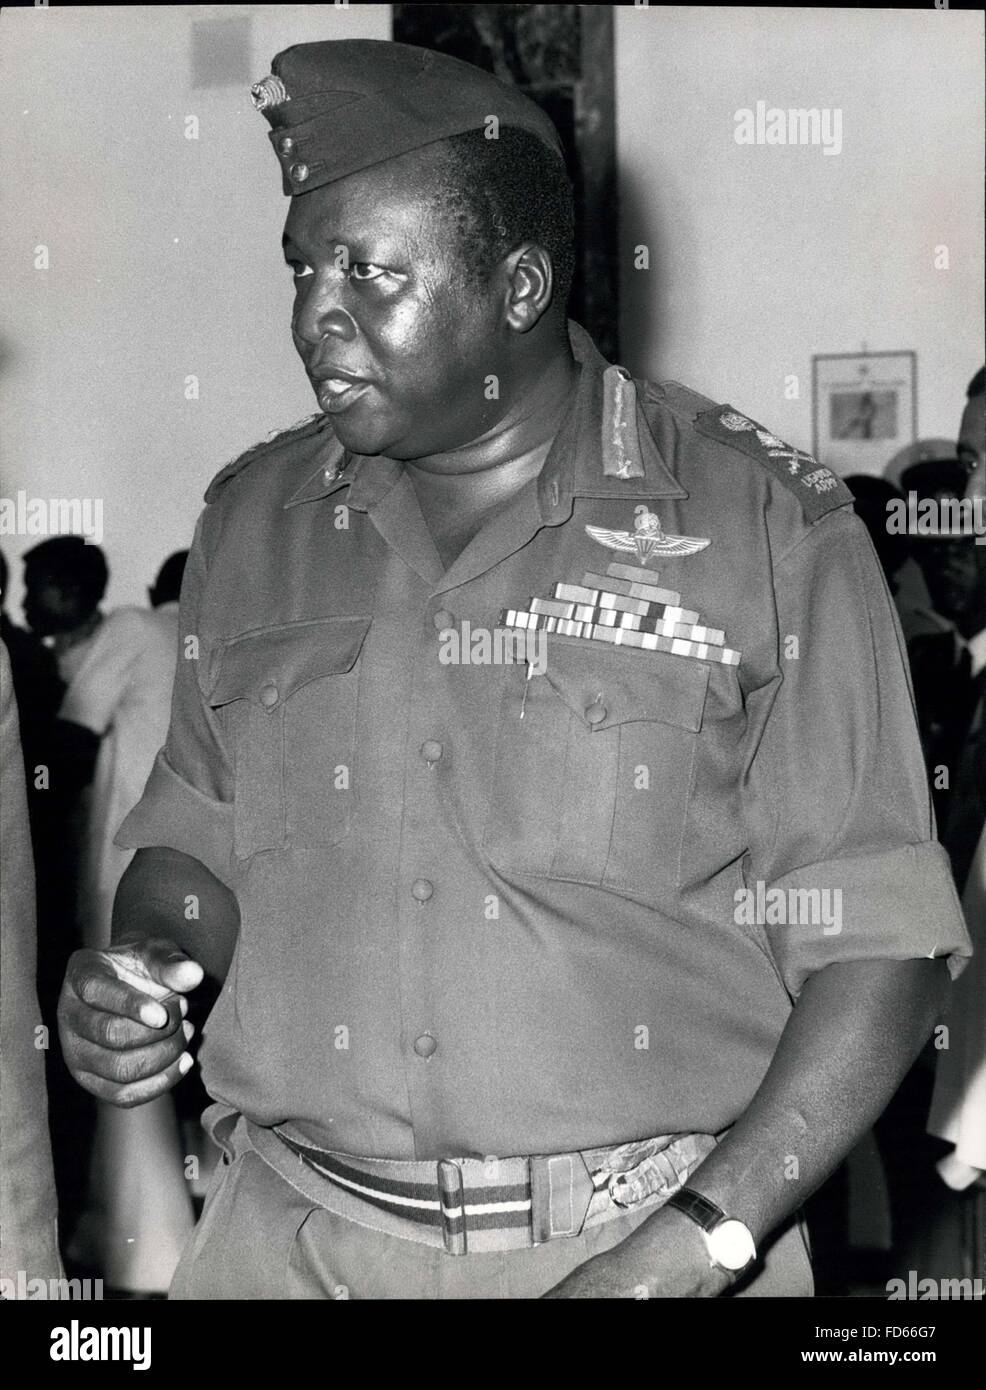 1971 - Alhaji General Idi Amin Dada, DC, DSO, MC, President of Uganda. Born 1920, West Nile, Uganda.: Joined King's African Rifles, 1946. Effendi, 1959. Commissioned, 1961. Major 1963. Colonel, 1964. Deputy Commander of the Uganda Army, 1964. Commander of the Army, 1966. Head of State after coup of 1971. Credits: Camerapix © Keystone Pictures USA/ZUMAPRESS.com/Alamy Live News Stock Photo